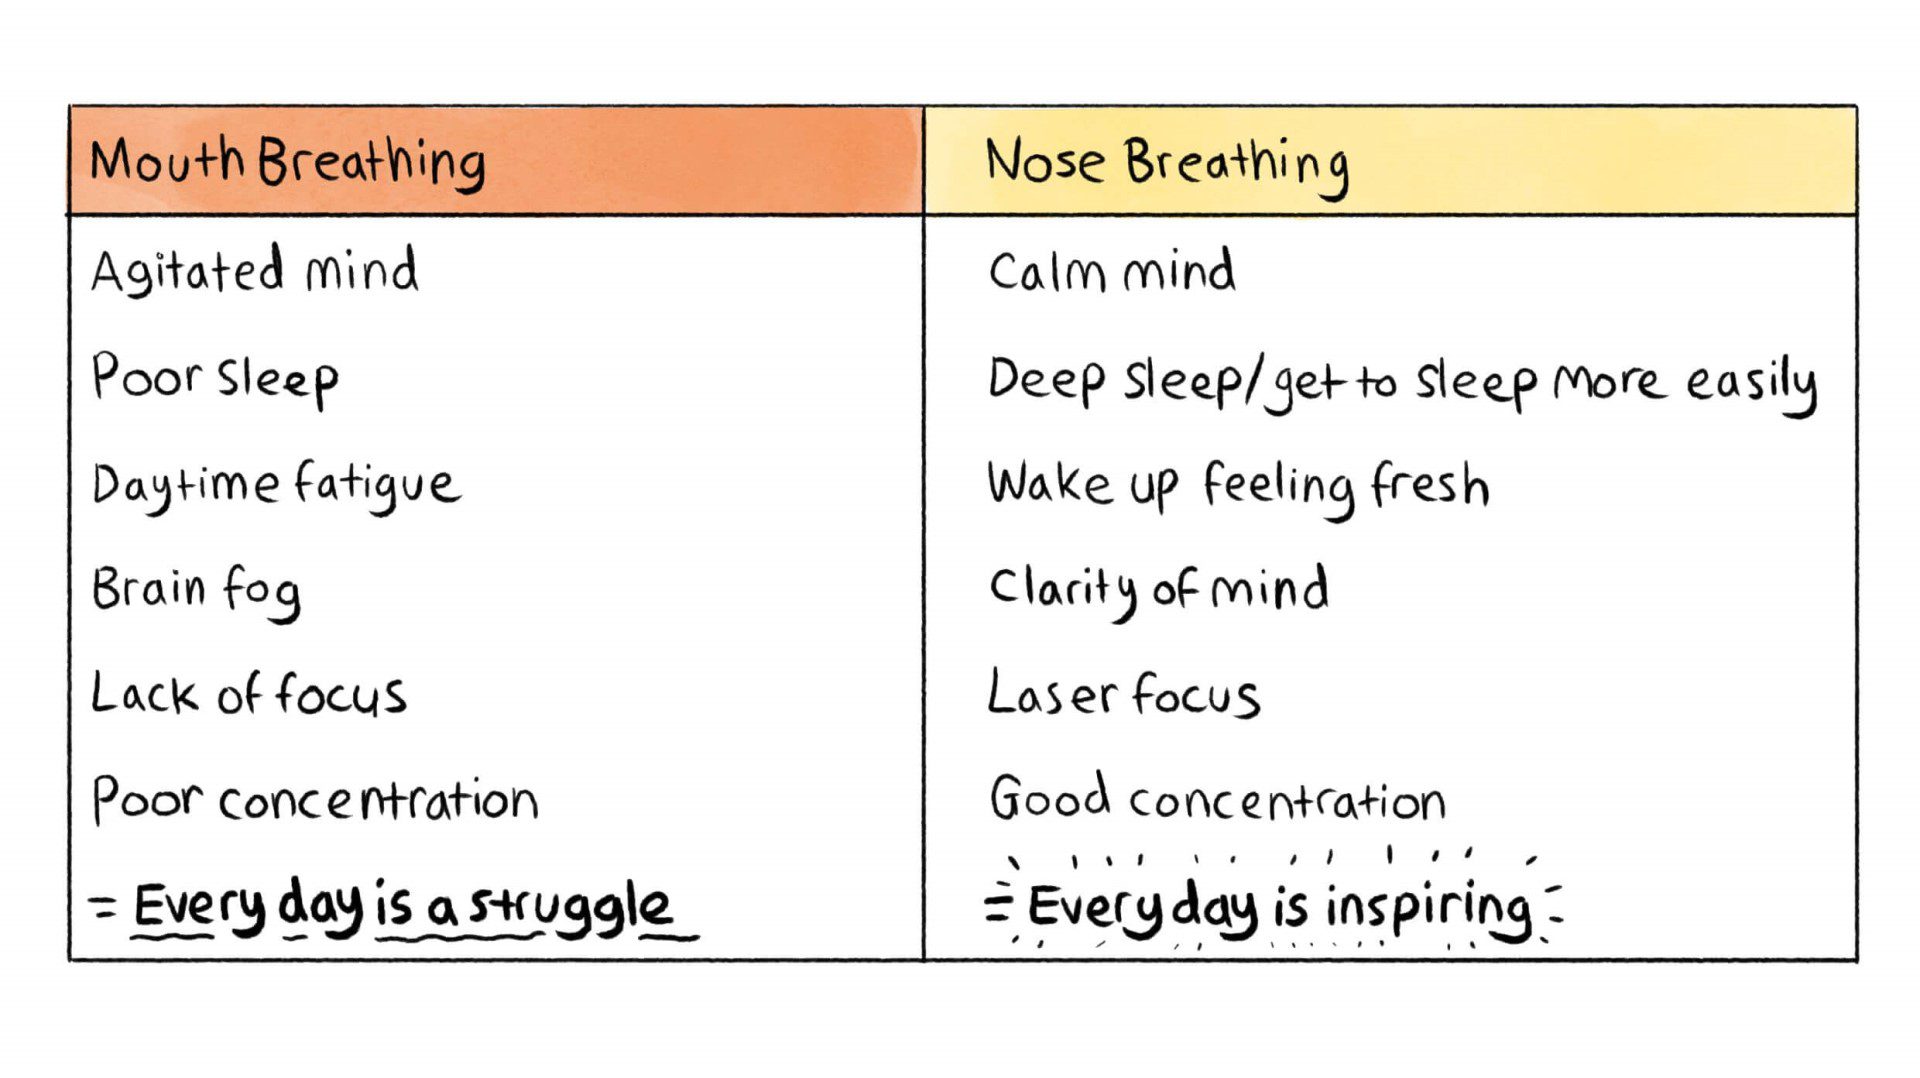 Nose breathing vs. mouth breathing diagram